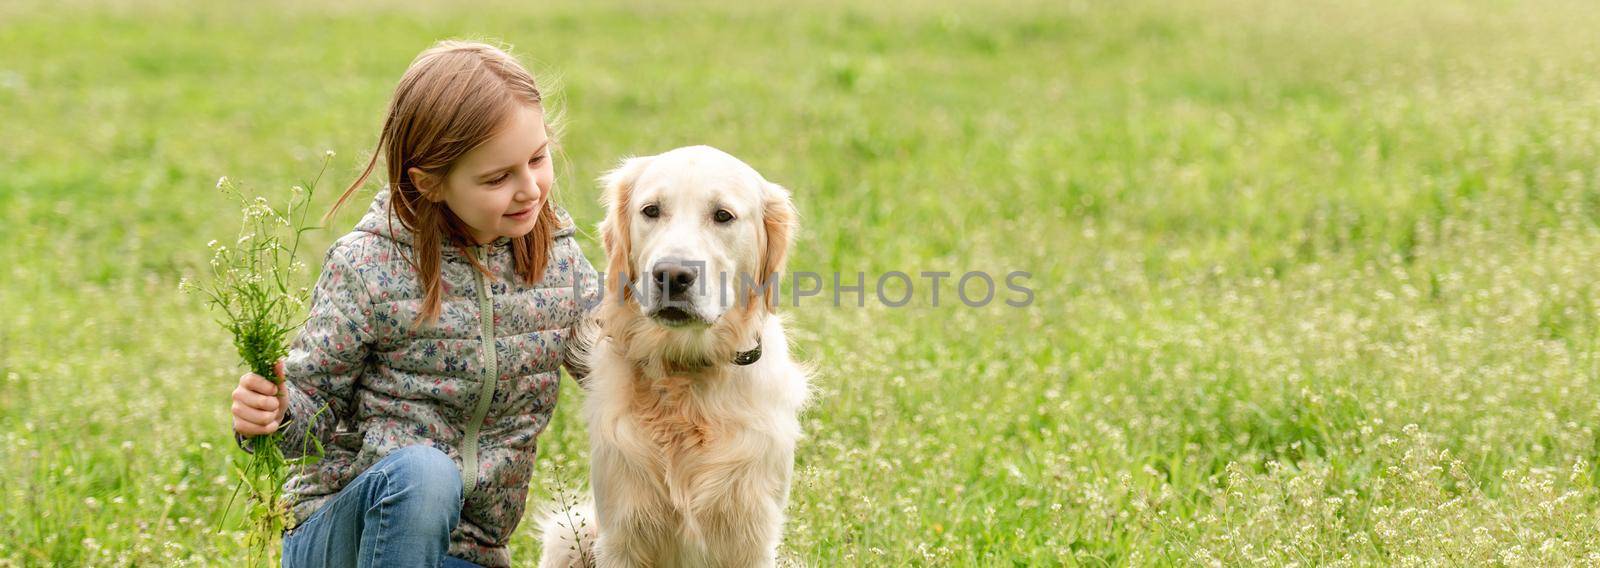 Smiling little girl looking at cute dog by tan4ikk1